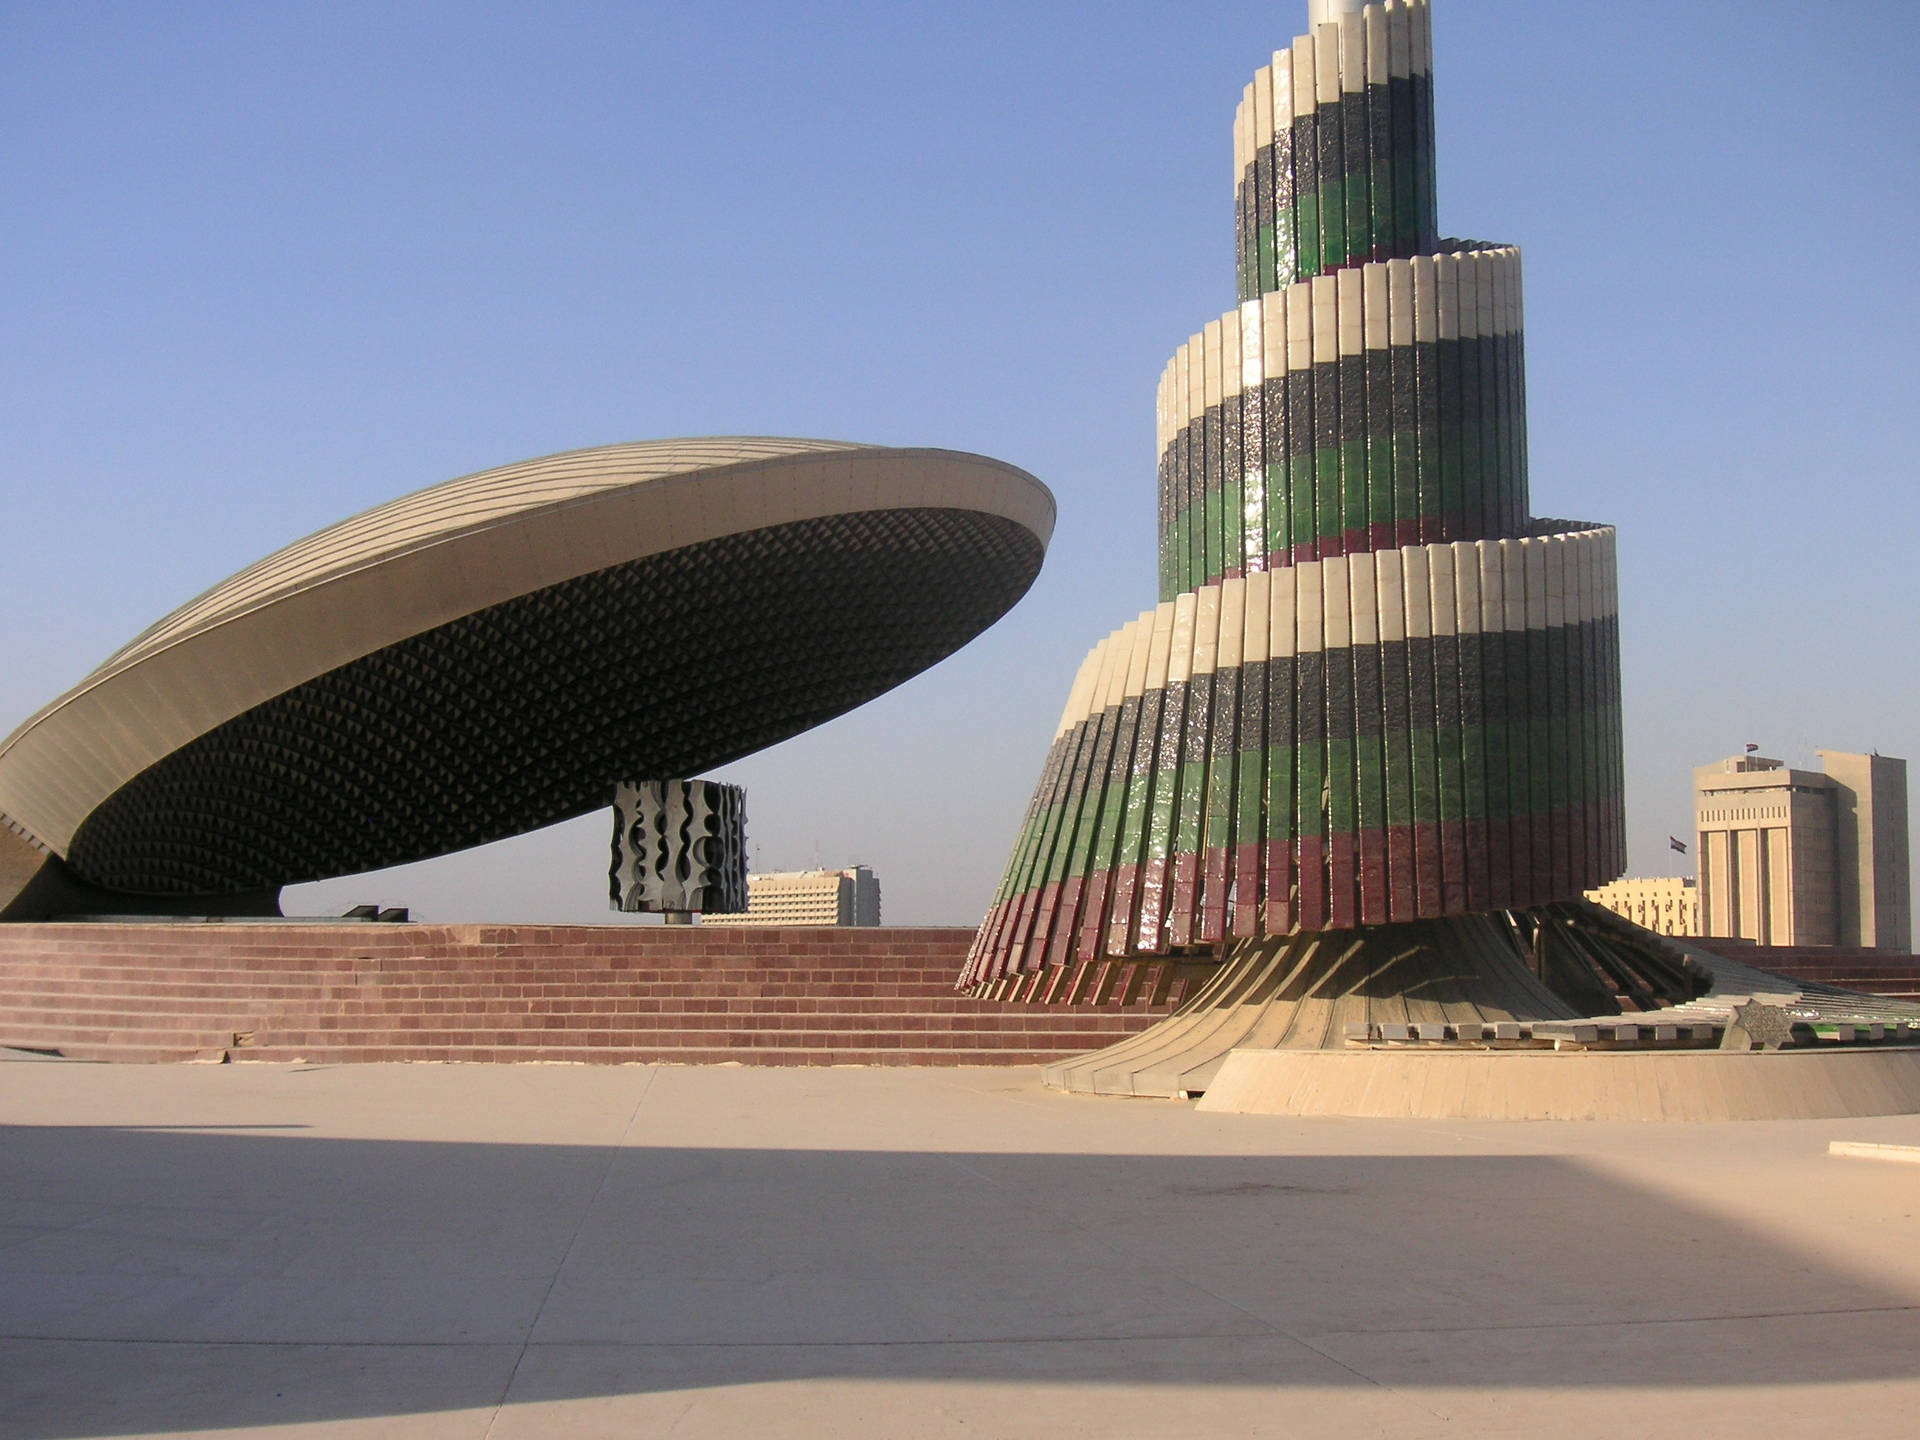 Iraq Dome And Spiral Tower